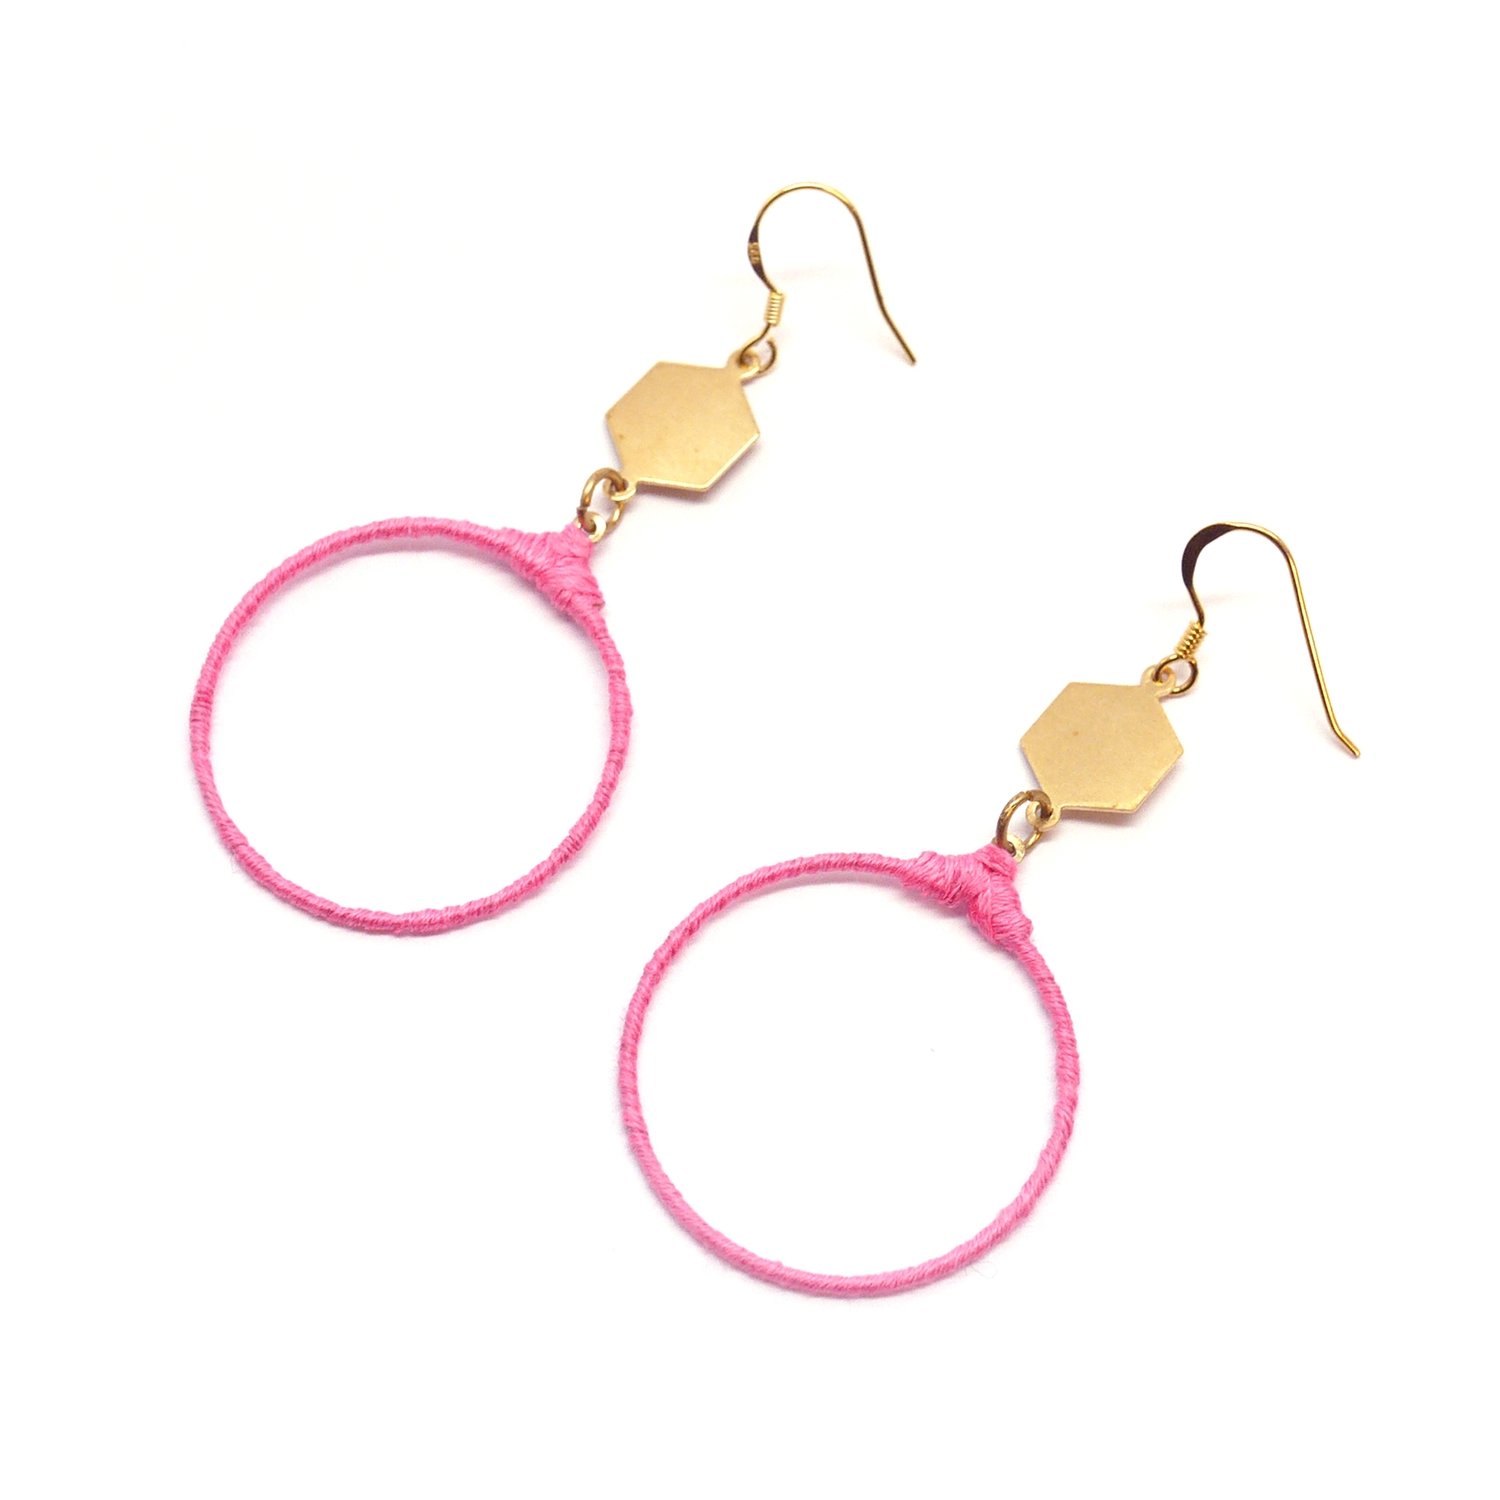 Flamingo pink earrings - designer shop, Gifts For Her, Fashion Accessories 